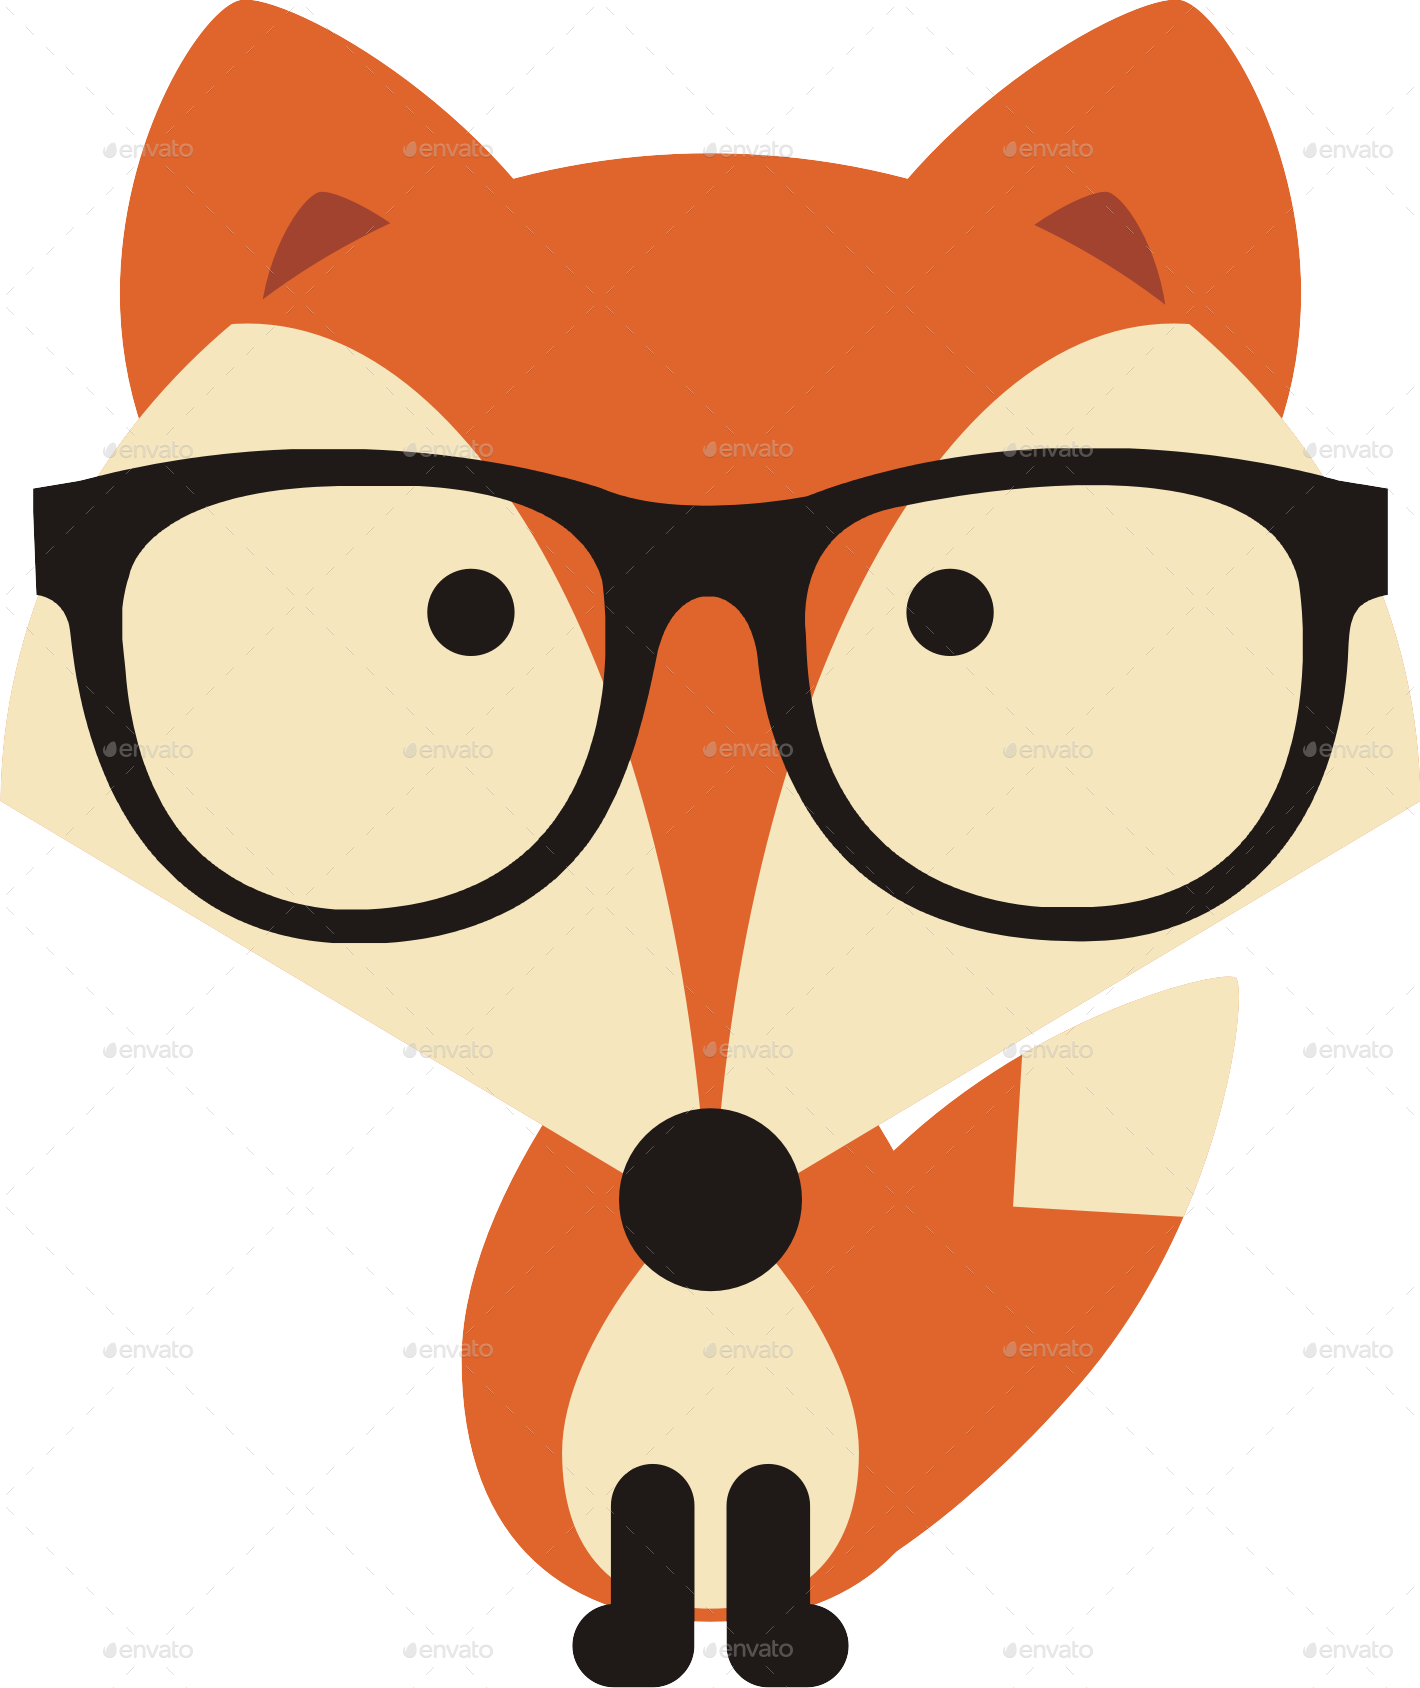 Eyeglasses clipart geeky glass. Fox with glasses by